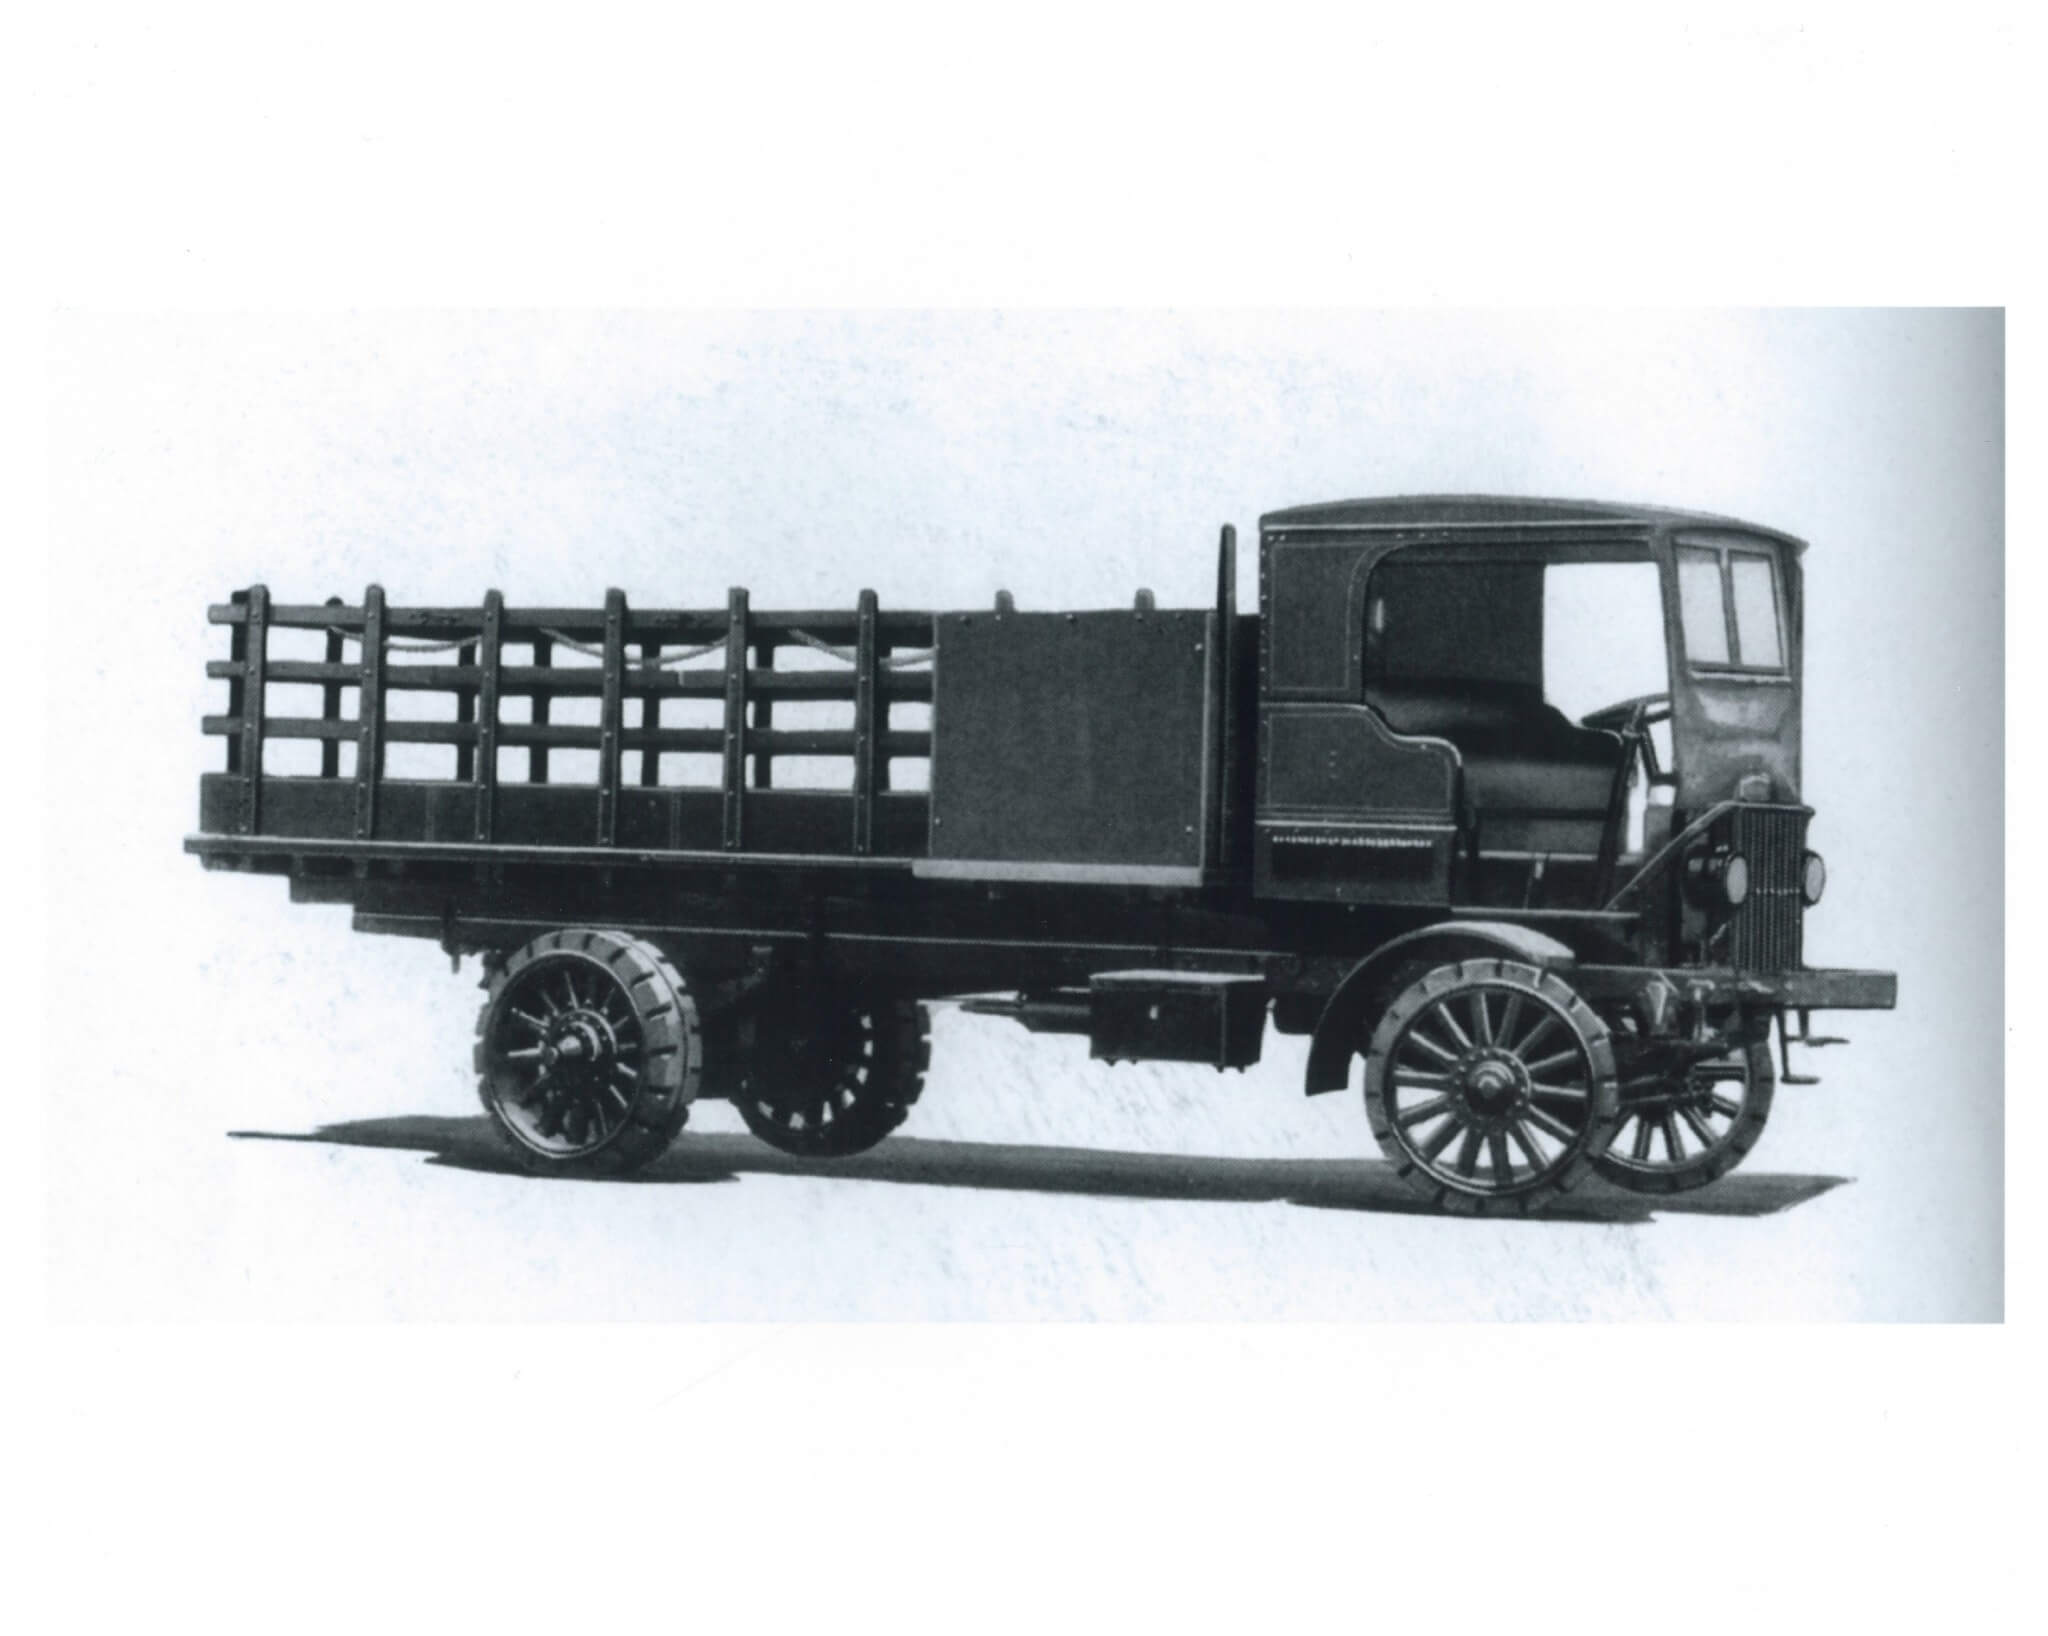 The firm’s fifth-year offering of their Type XXVIL platform. Introduced in 1920, this platform was offered in 2- and 5-ton versions as shown here. Units were powered by initially by inline four-cylinder mills, six-cylinder powerplants were added for greater GVW and chassis length. Autocar was a leader in popular cab-over production.